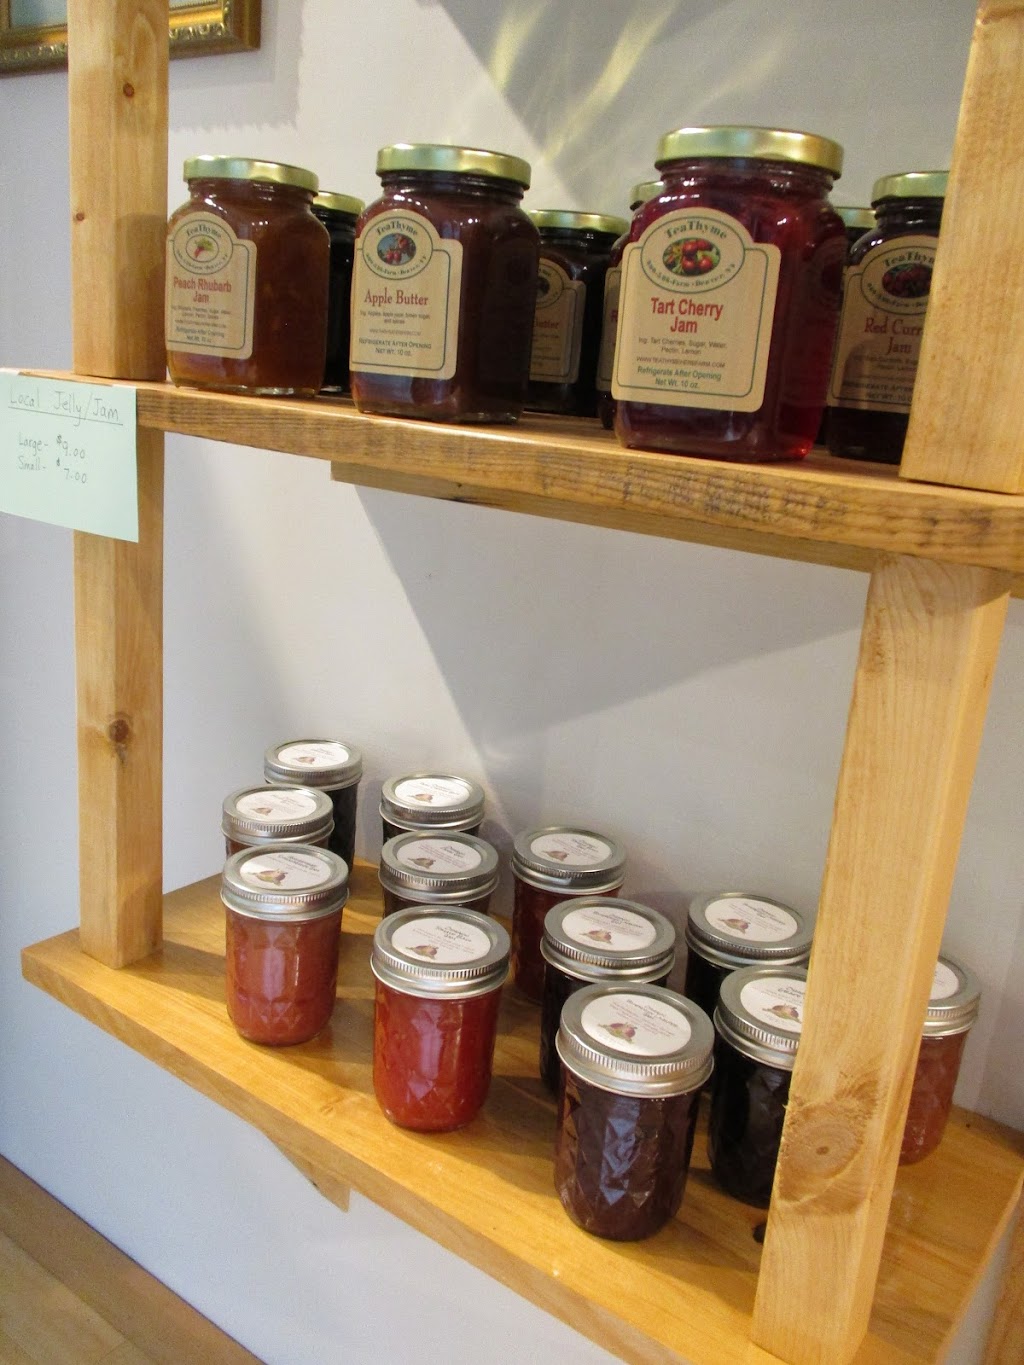 Two Stones Farm Store And Creamery | 1060 Main St, Fleischmanns, NY 12430 | Phone: (845) 701-1364